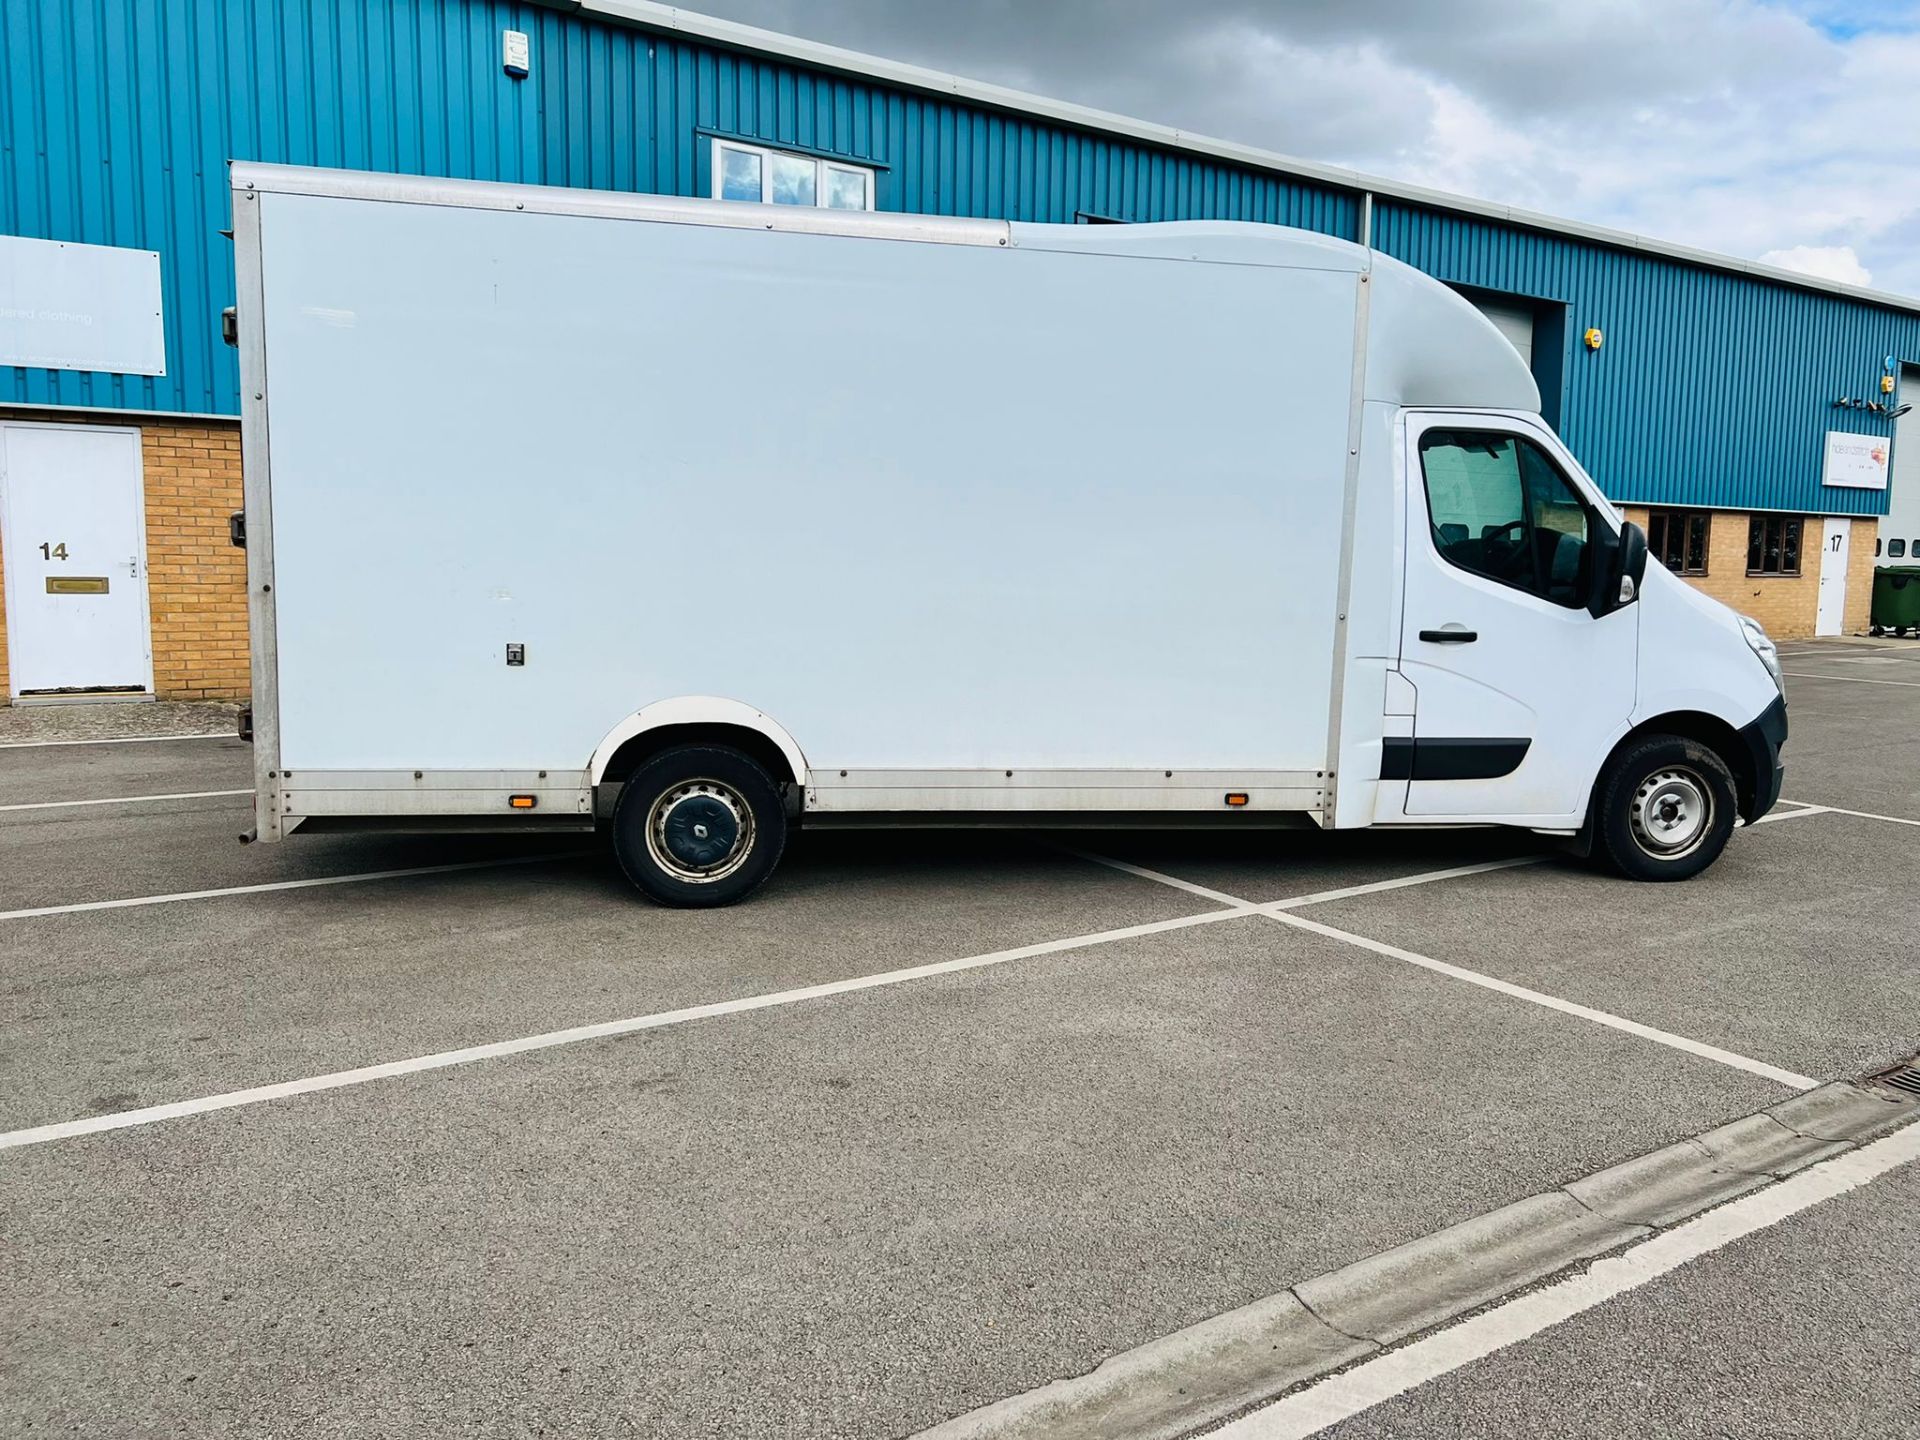 Renault Master 2.3DCI Low Loader Luton *LWB*-Euro 6 -130Bhp -2019 Model - *ULEZ COMPLIANT*- Air Con - Image 7 of 19